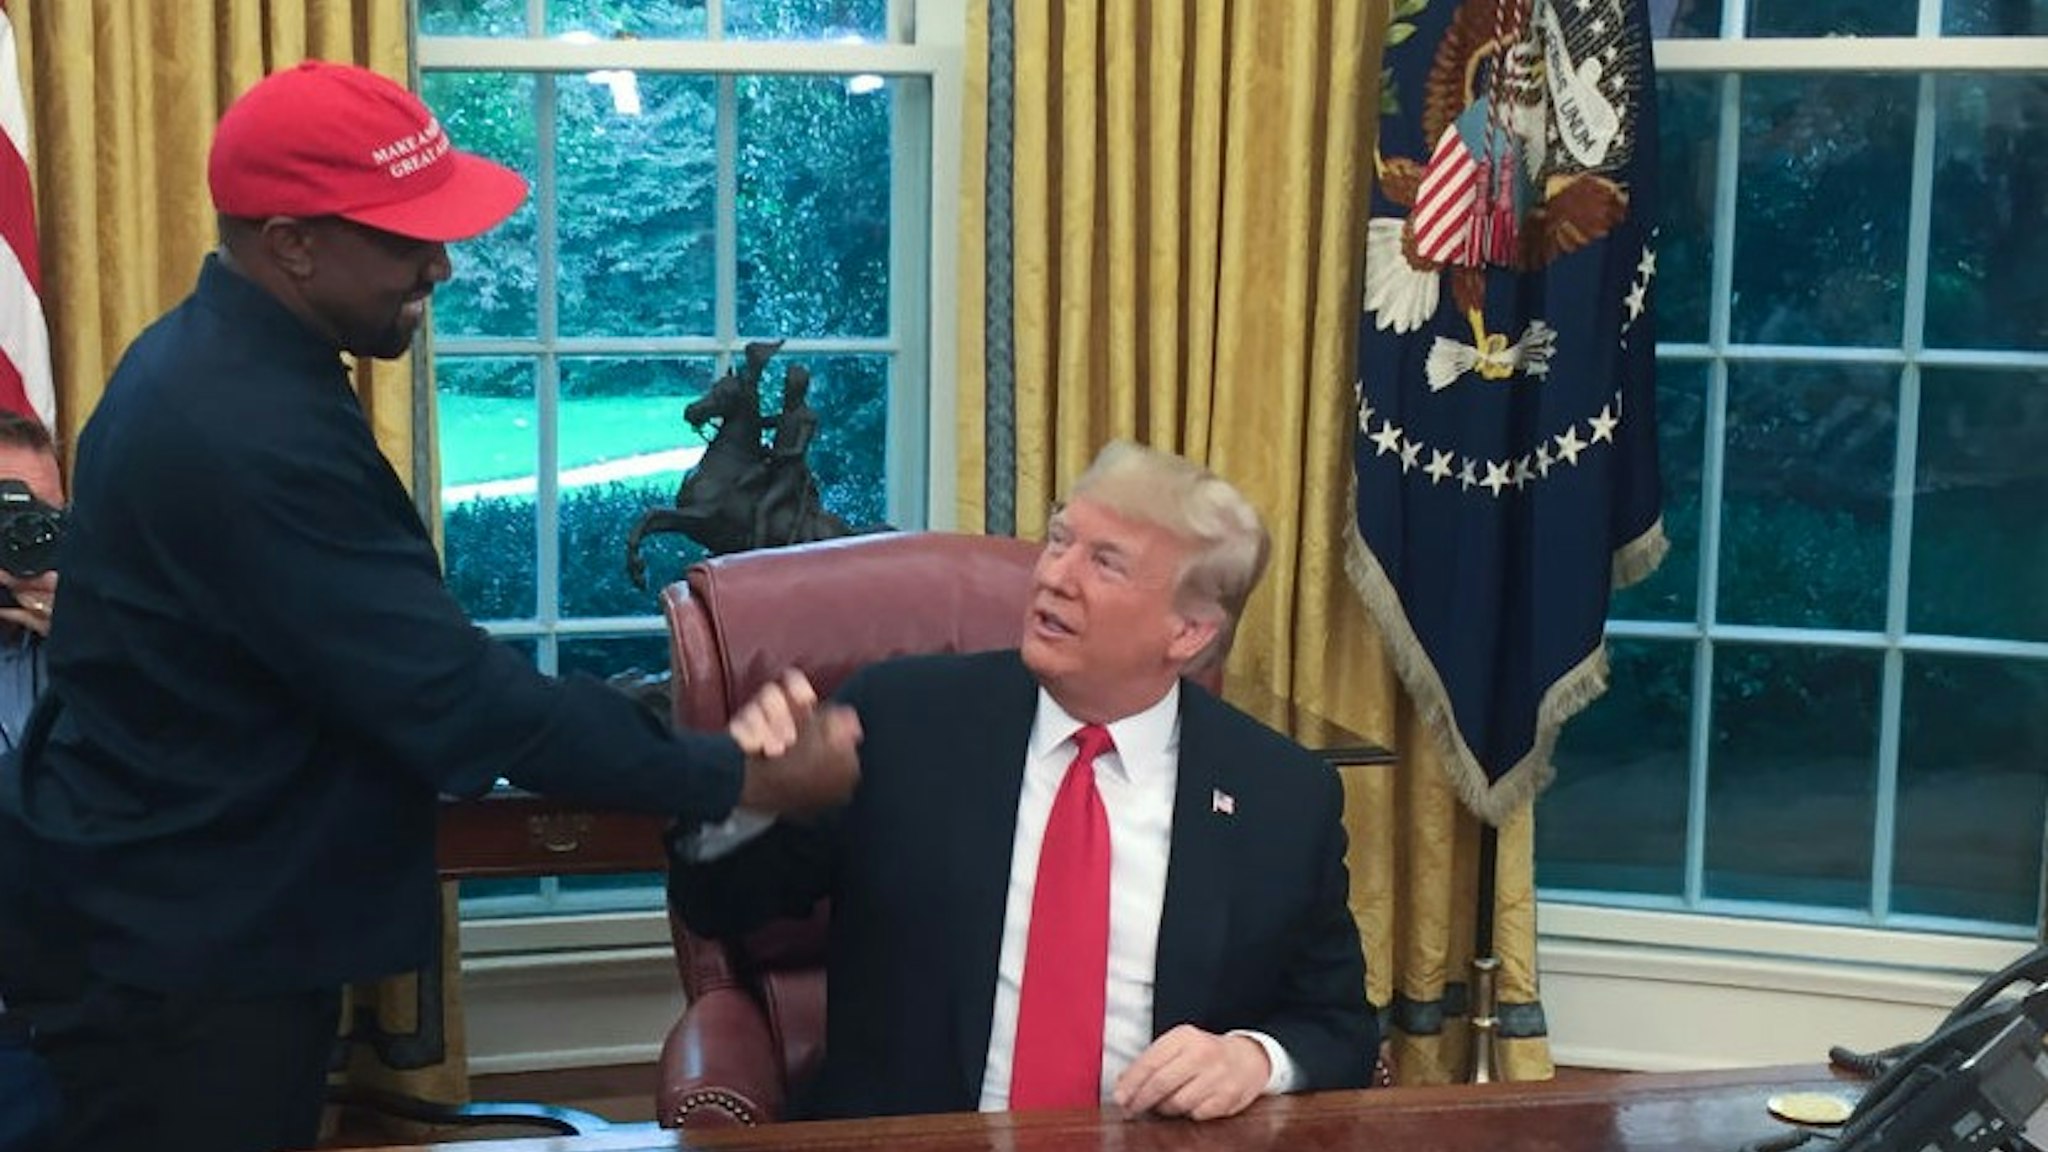 President Donald Trump meets with rapper Kanye West in the Oval Office of the White House in Washington, DC, October 11, 2018. (Photo by SEBASTIAN SMITH / AFP) (Photo credit should read SEBASTIAN SMITH/AFP/Getty Images)